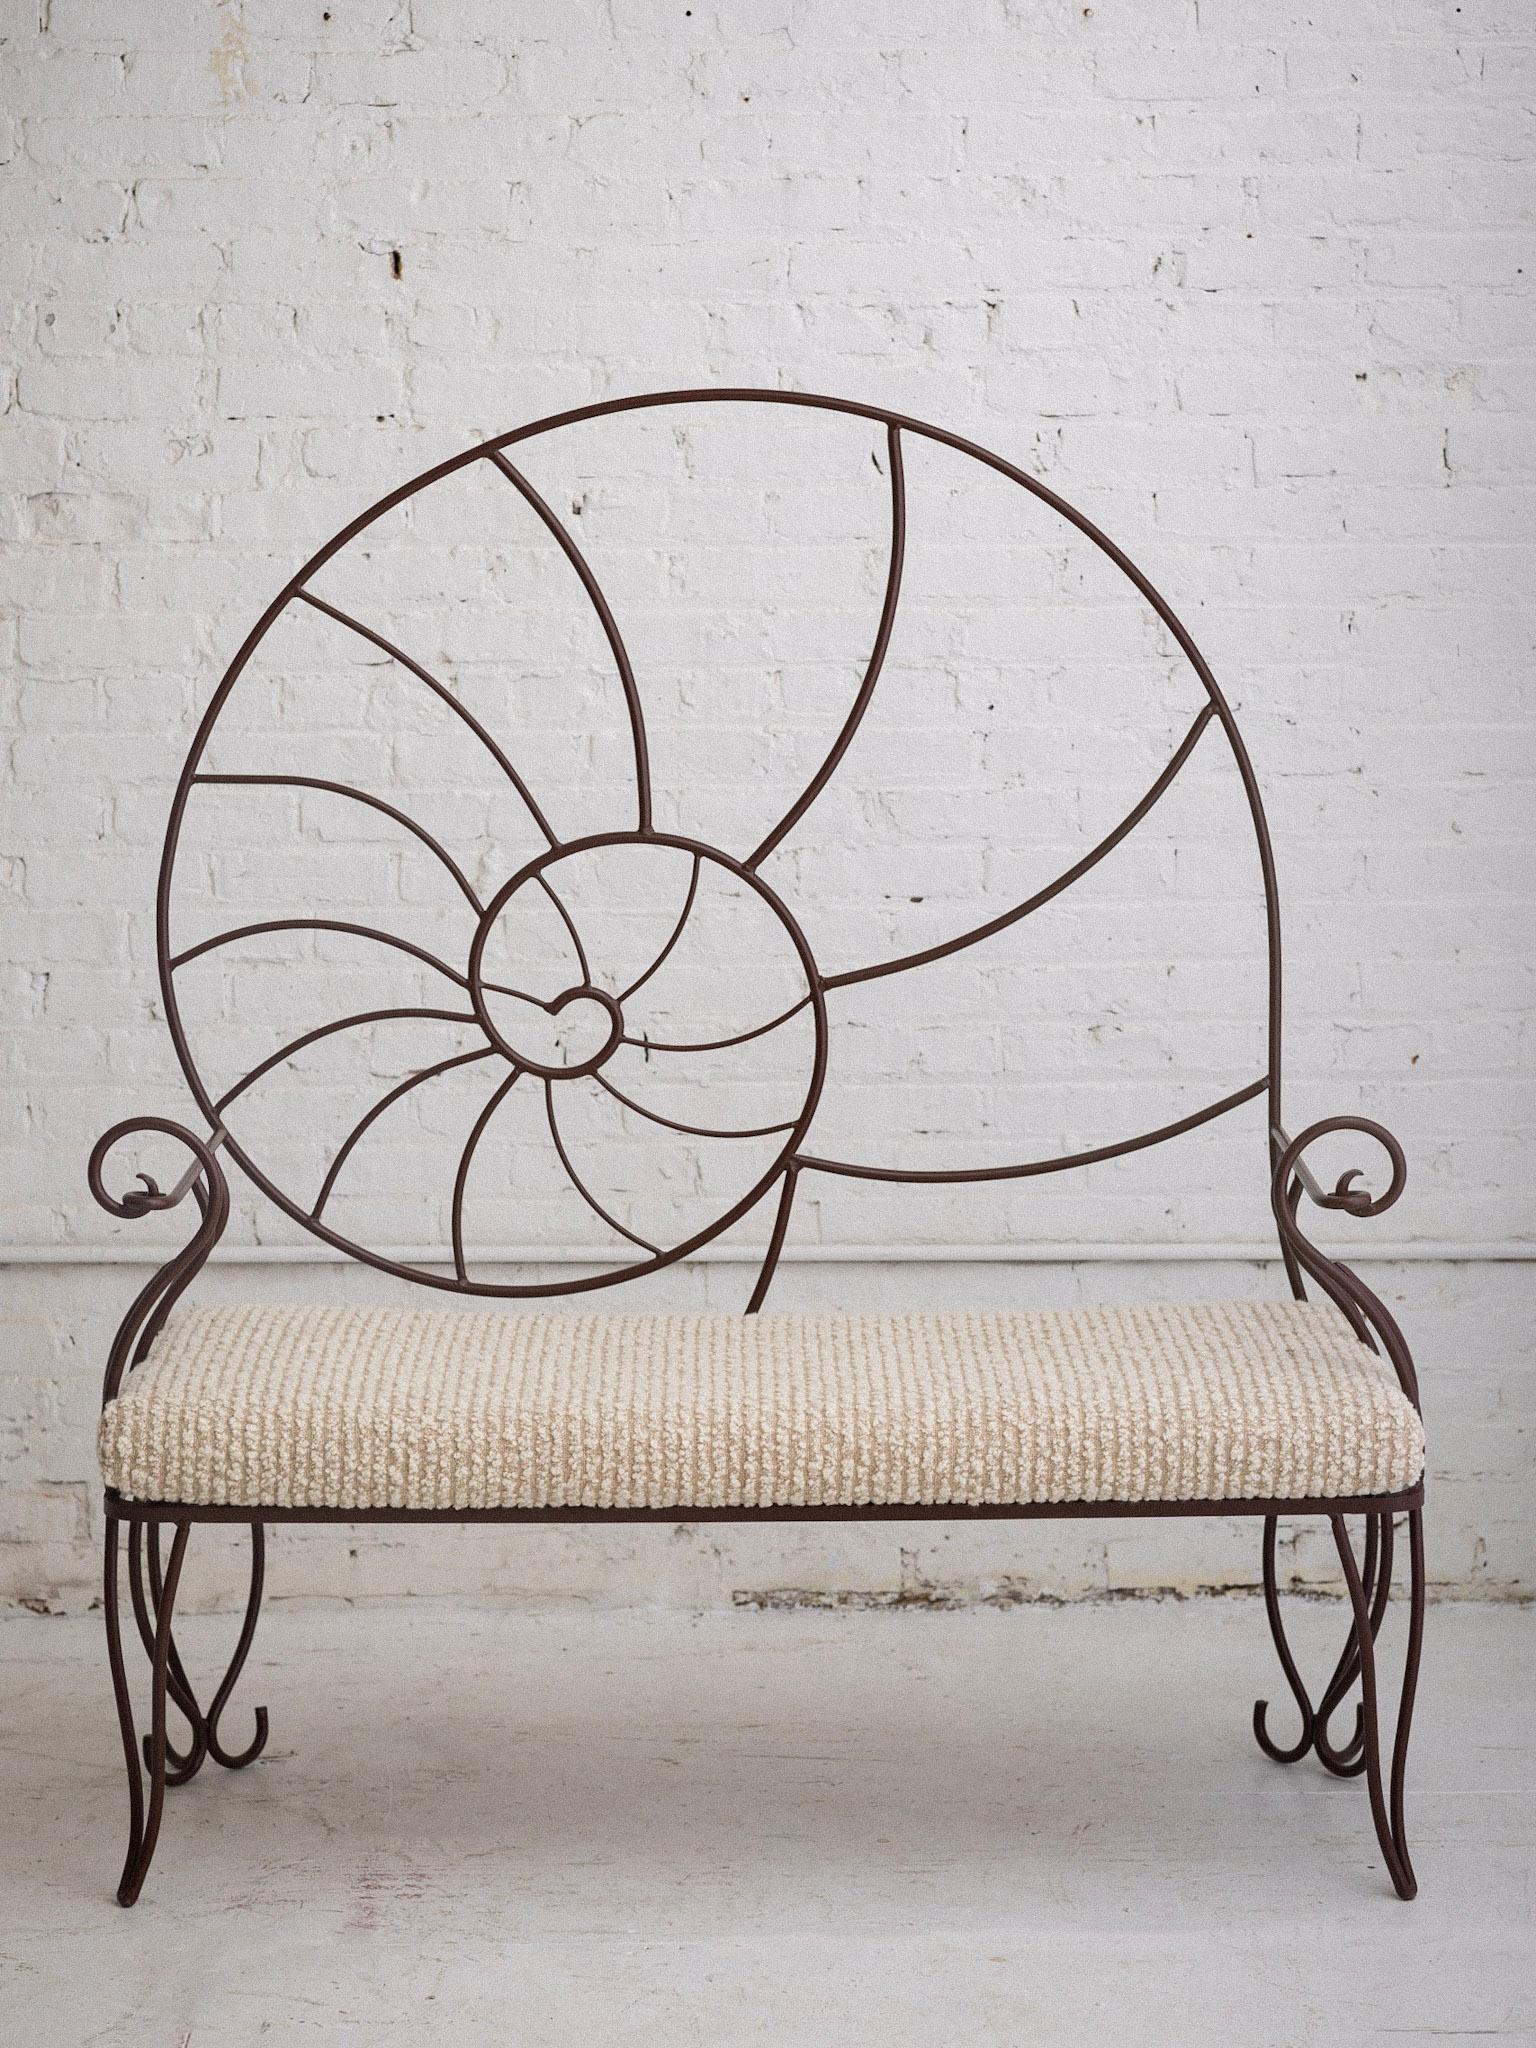 A post modern wrought iron bench. Nautilus form Silhouette. Powder coated in a matte rust color. Newly upholstered cushion in high quality striped wool bouclé.